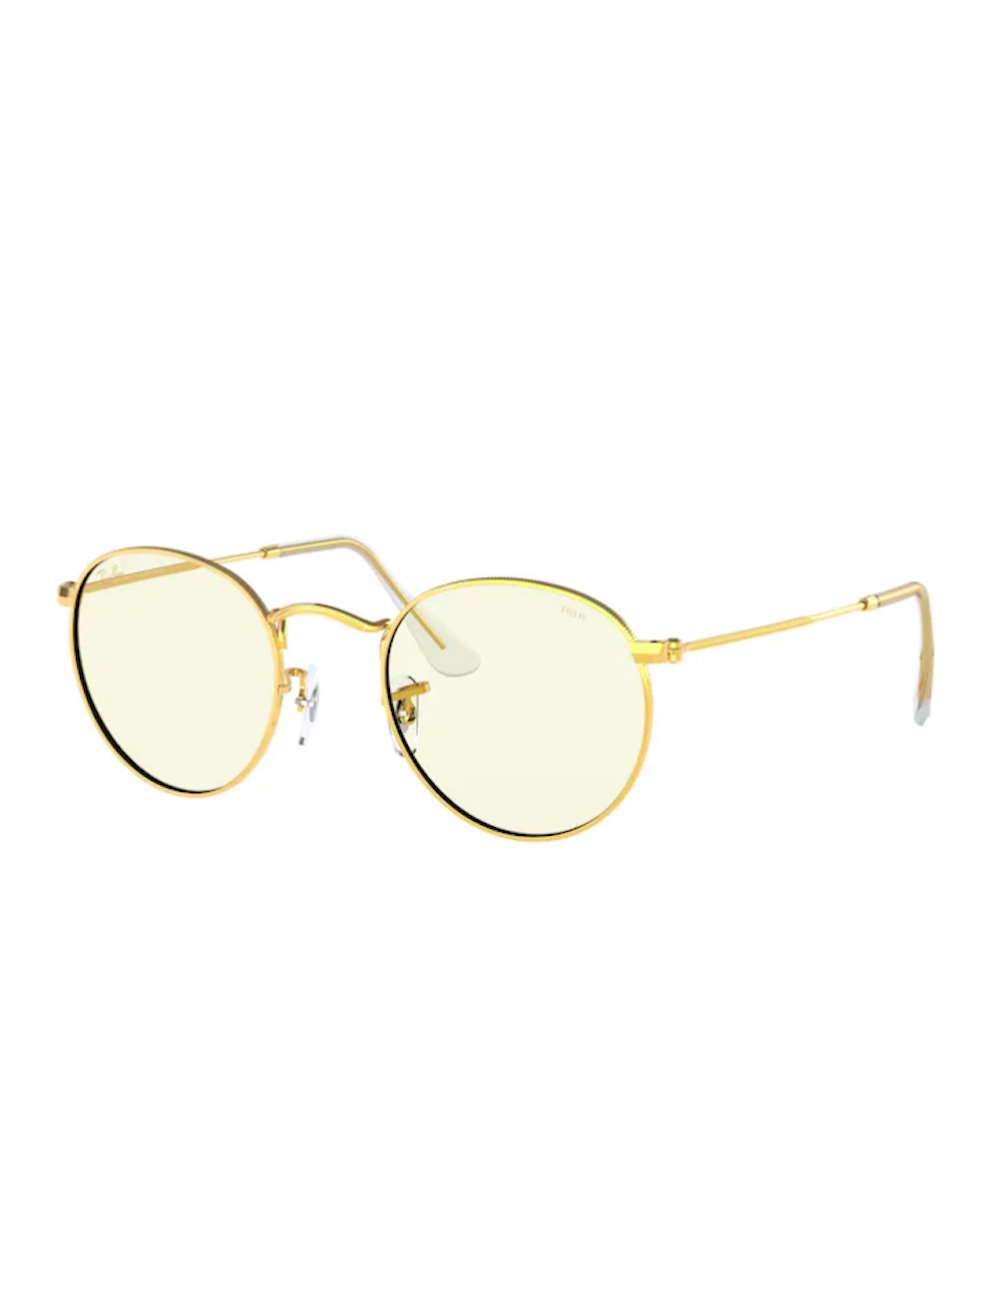 Ray Ban Round Metal RB3447 9196BL